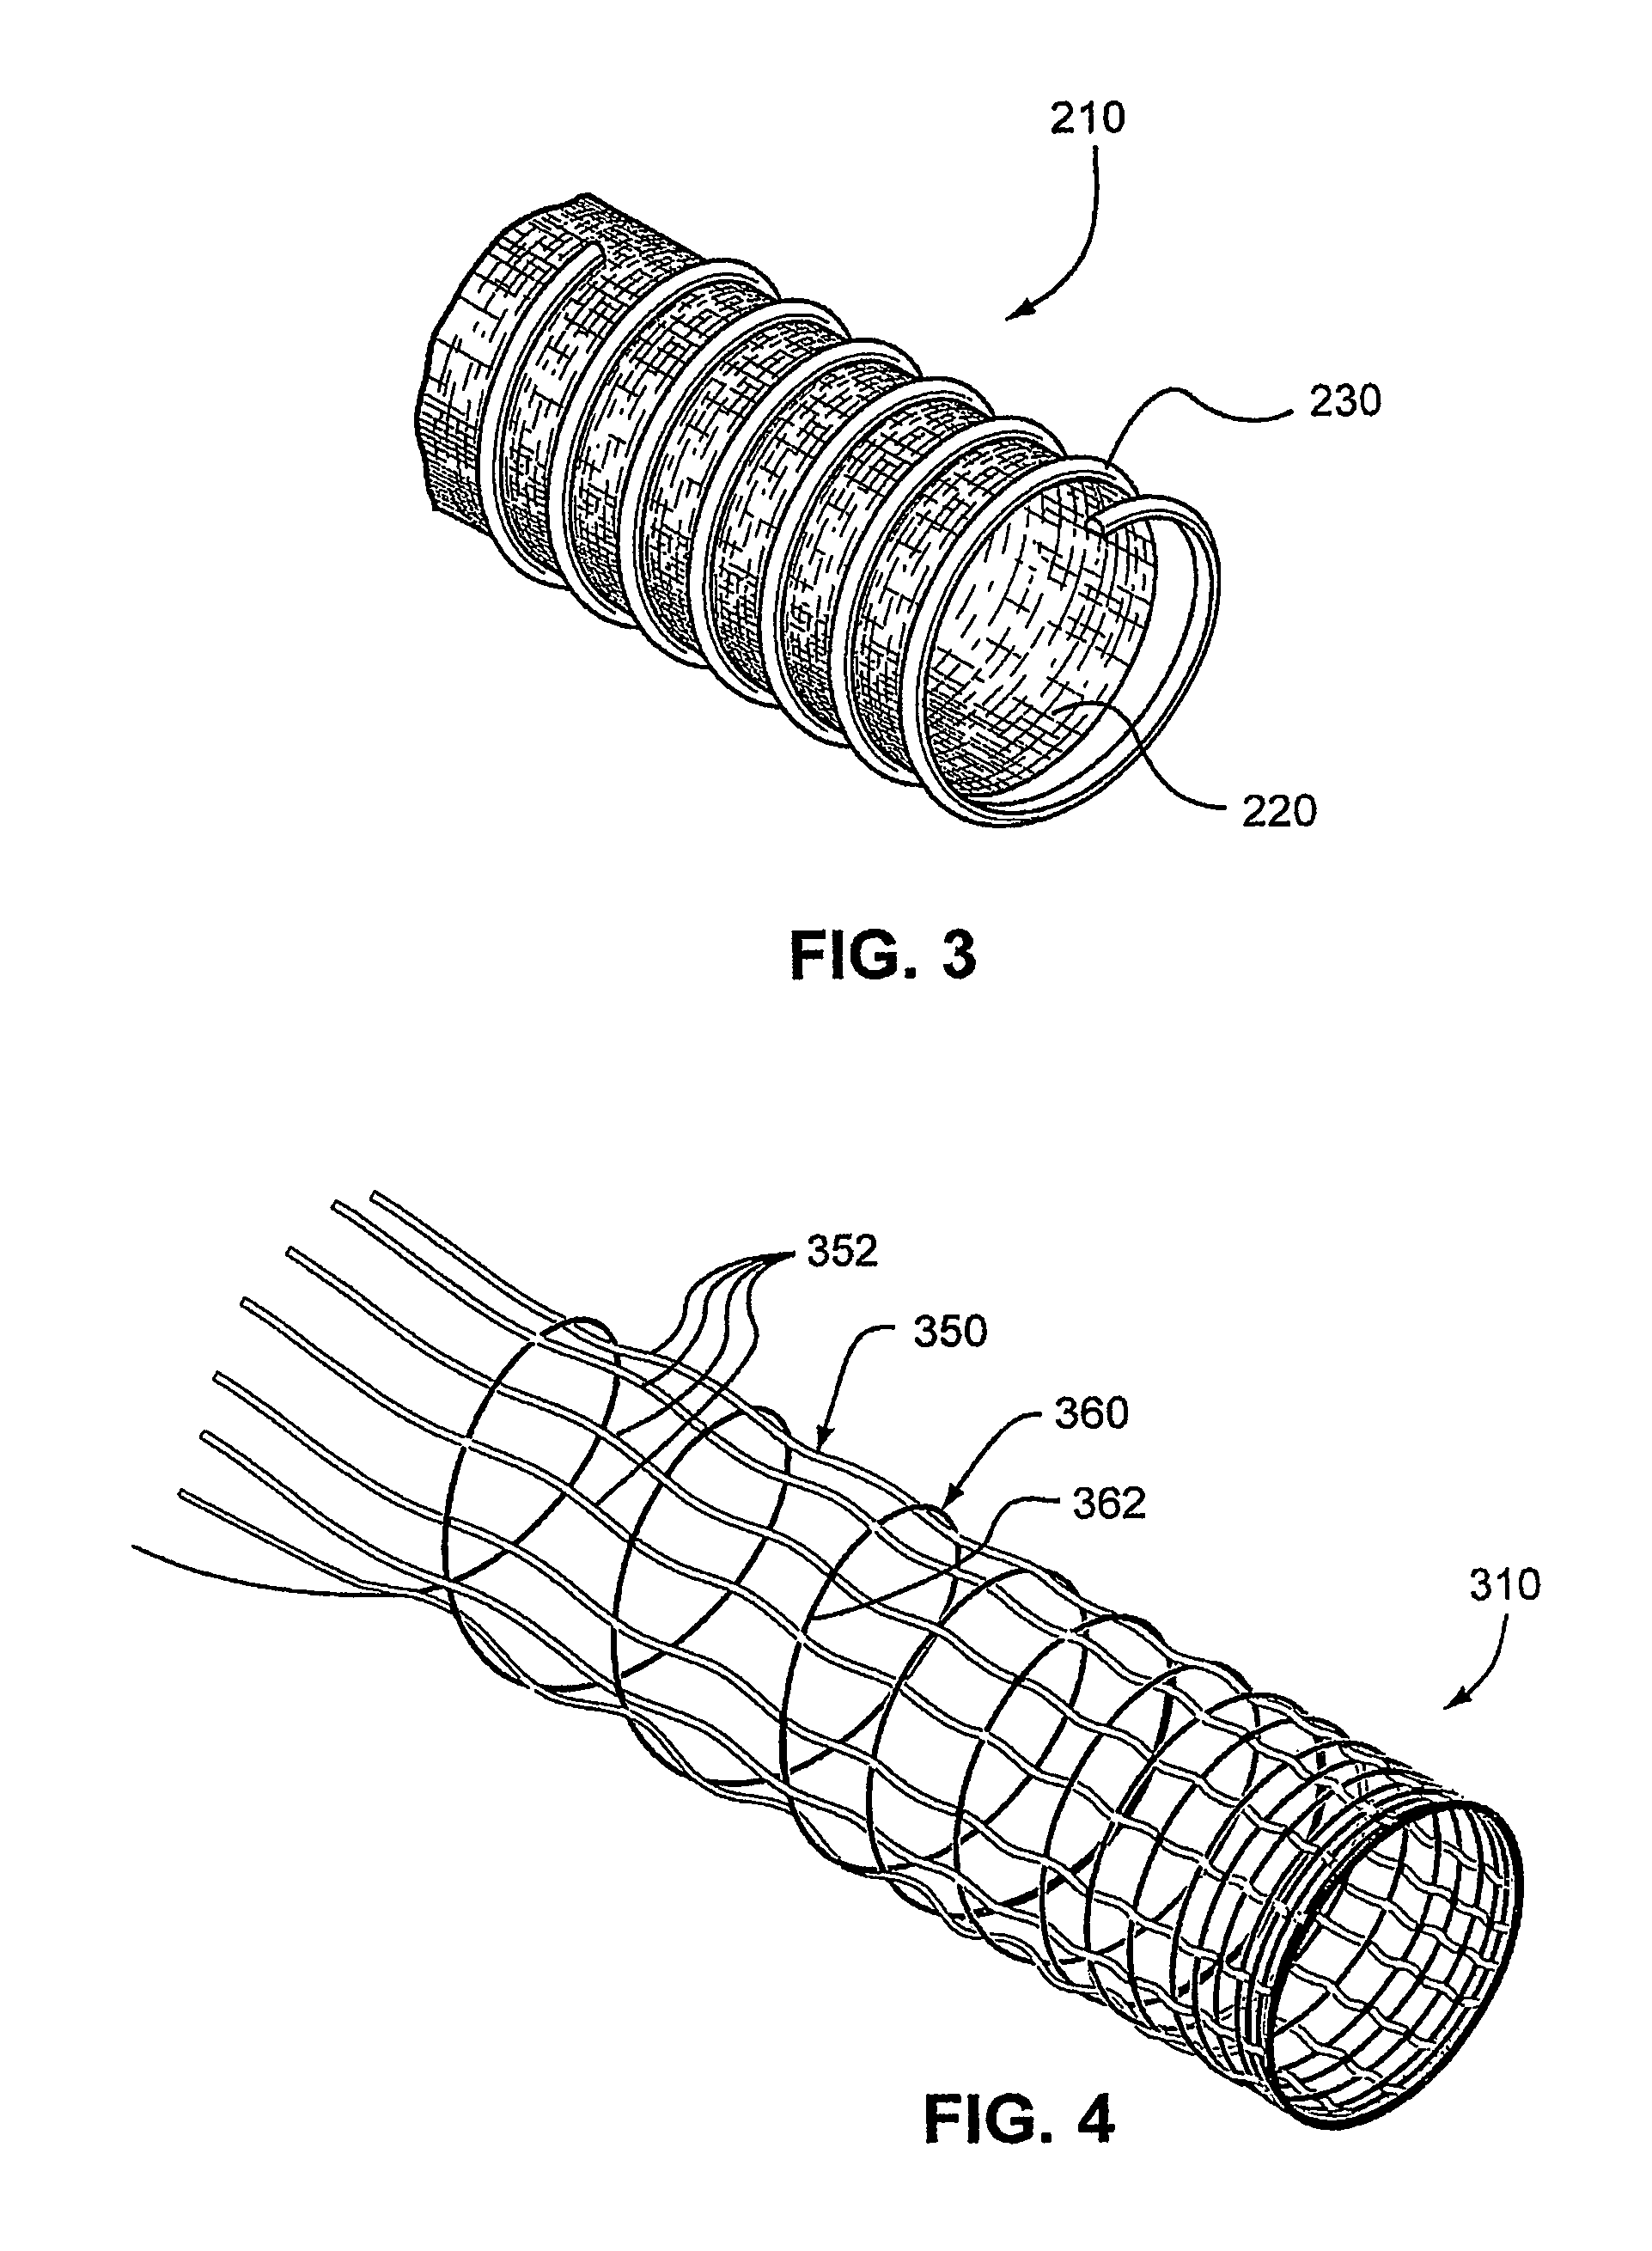 Air delivery conduit